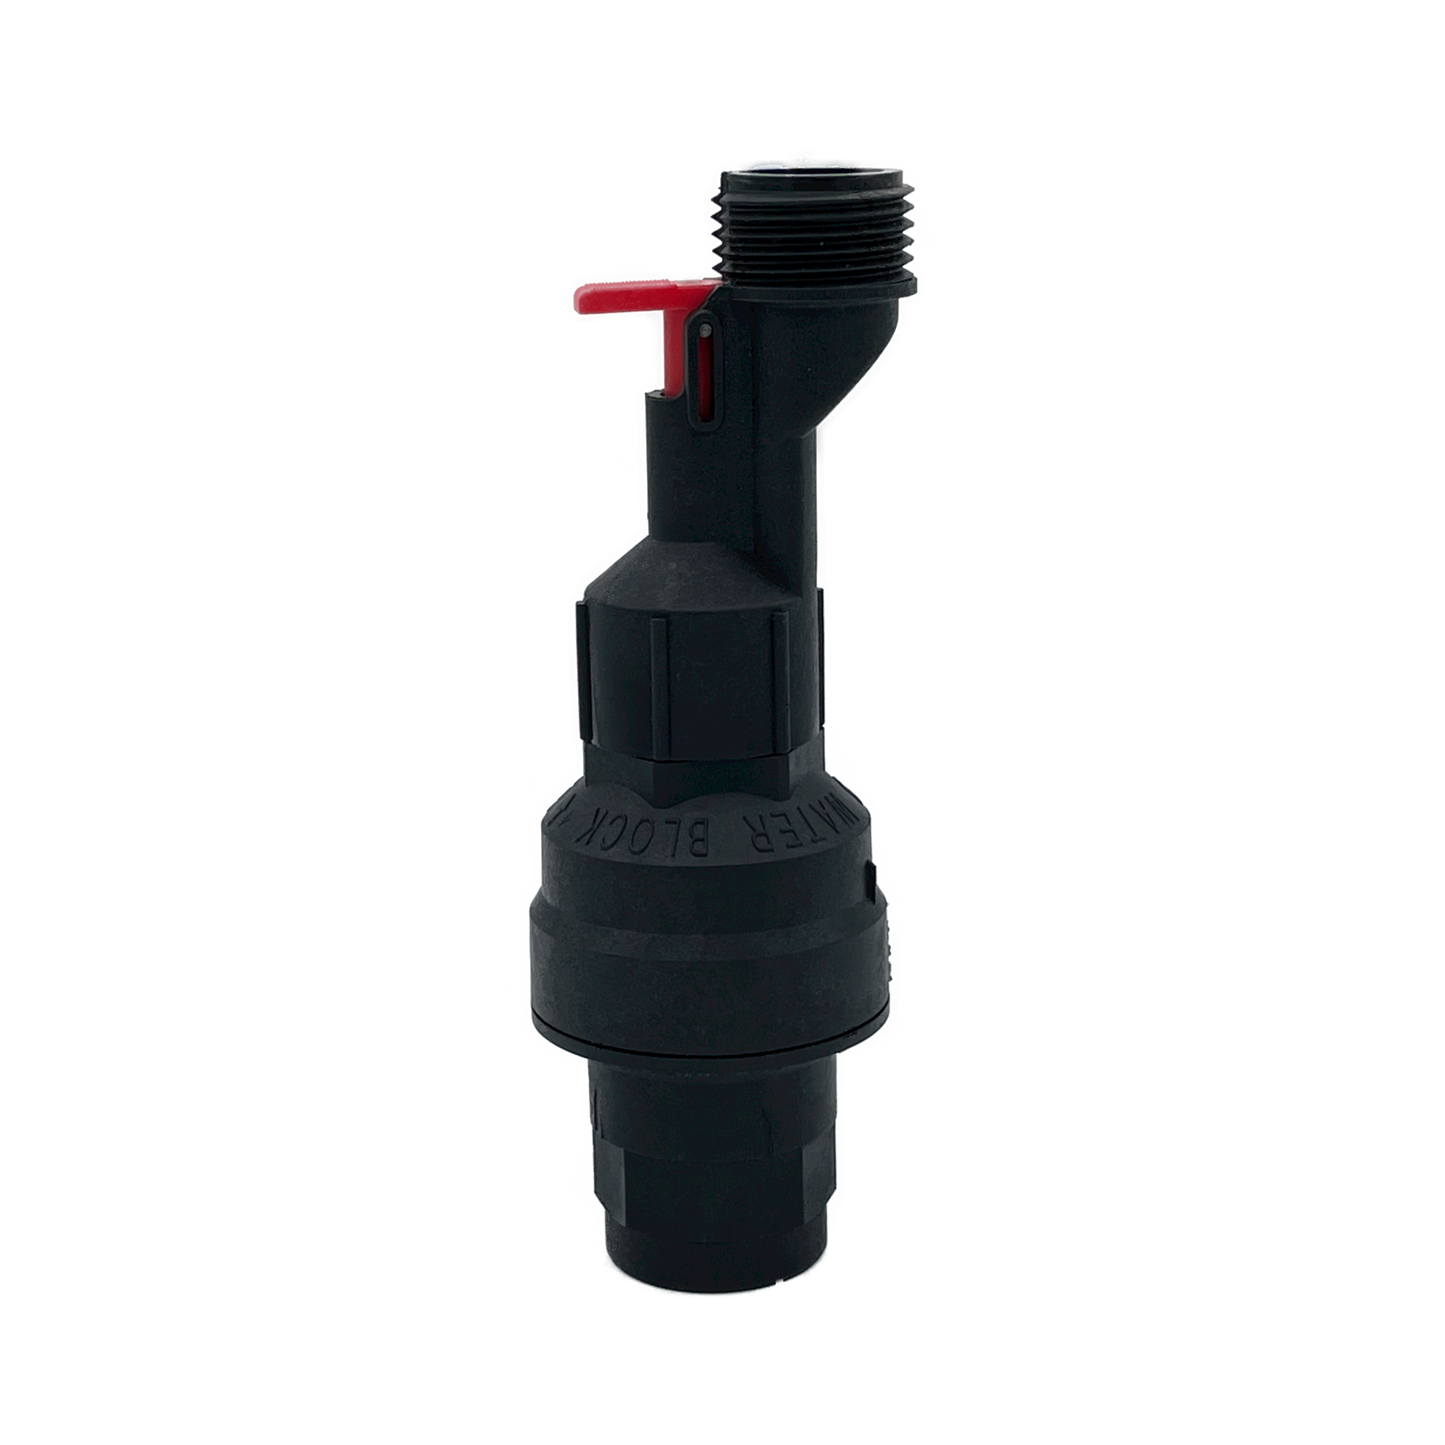 Water Block water shutoff system with the reset tool attached for easy reset. The tool will reactivate the Water Block without needing to disassemble your plumbing system. It is purely for convenience and not necessary for reset. Easy to install configuration.